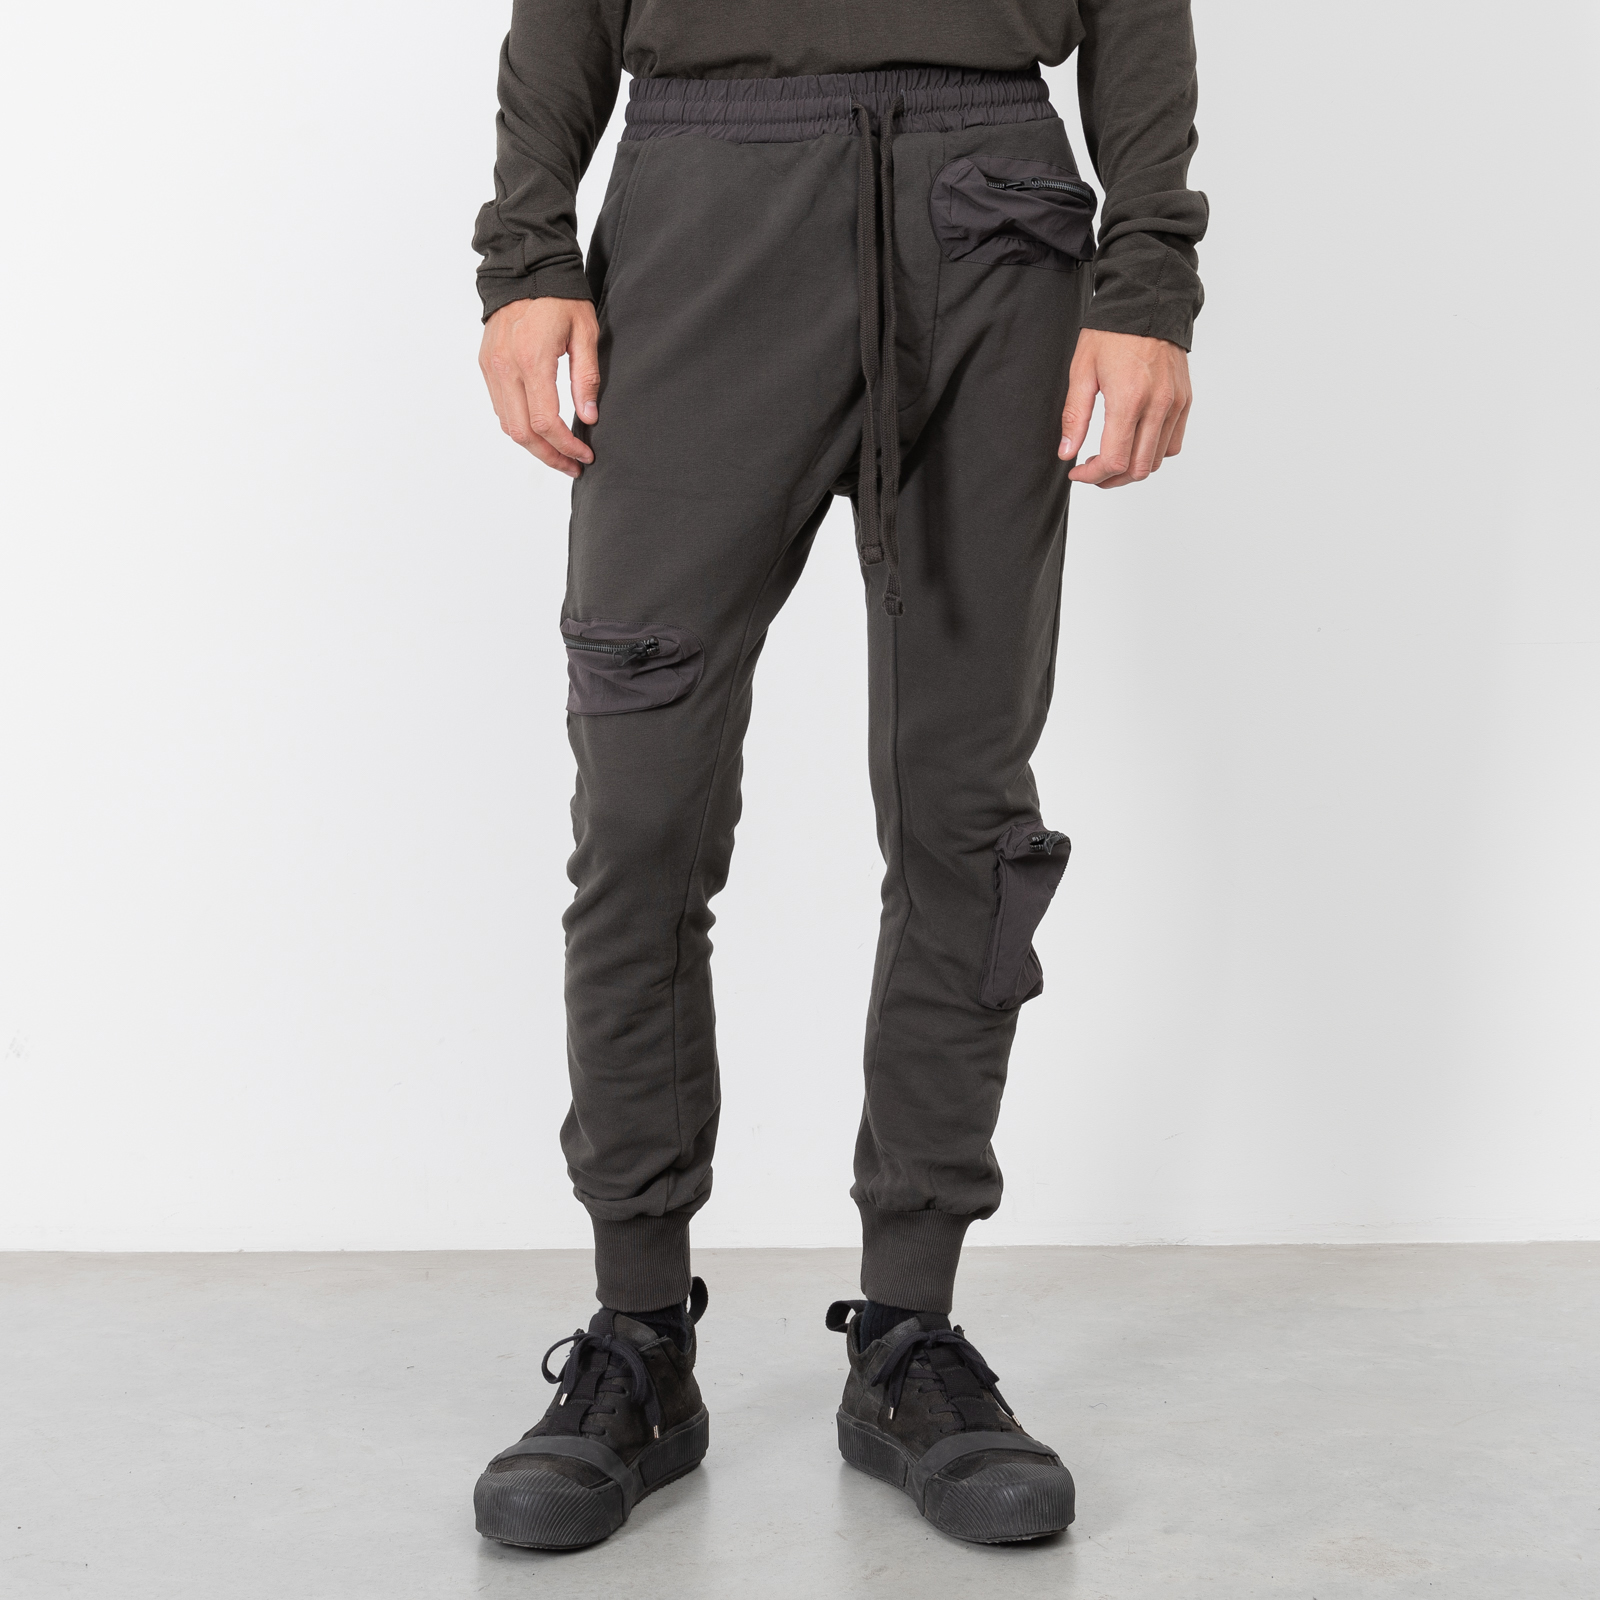 BROWN UTILITY JERSEY PANTS|wolfensson